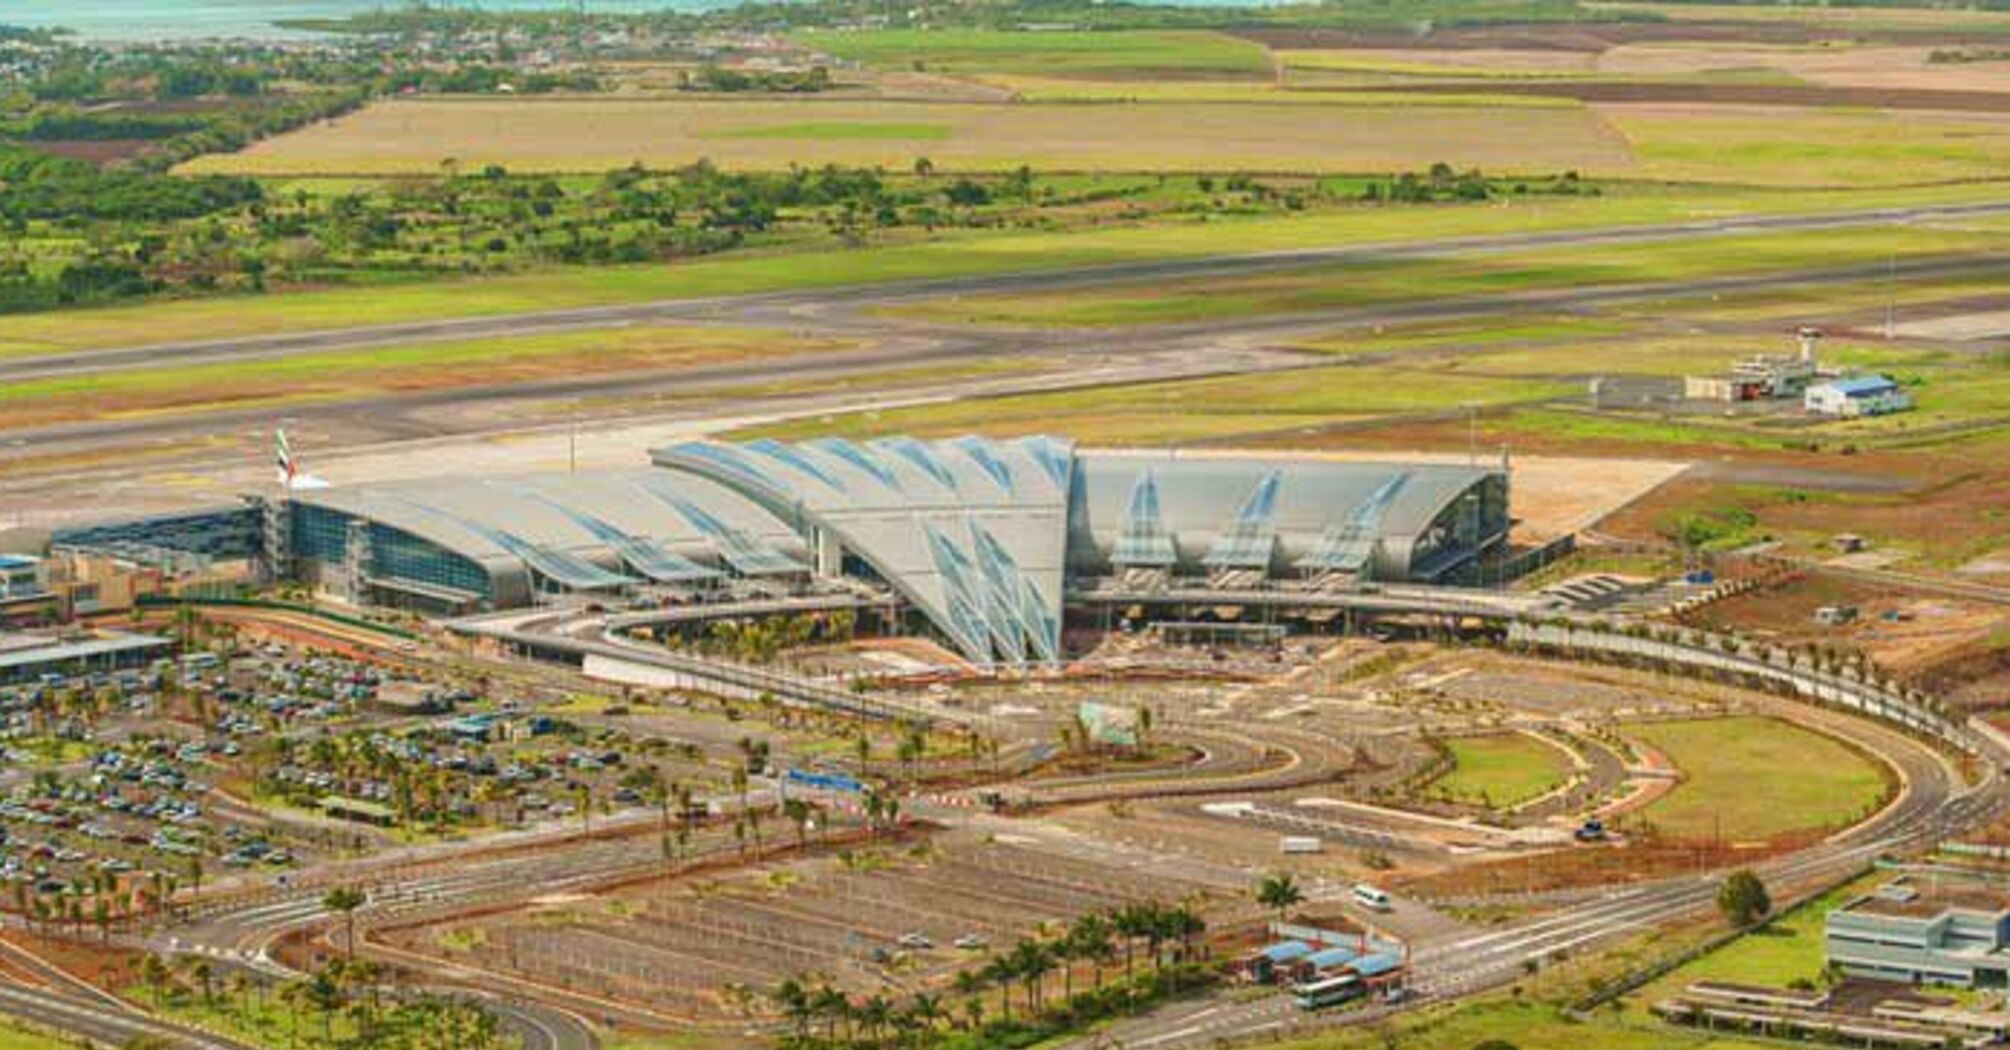 Mauritius is reopening its airport after the tropical cyclone